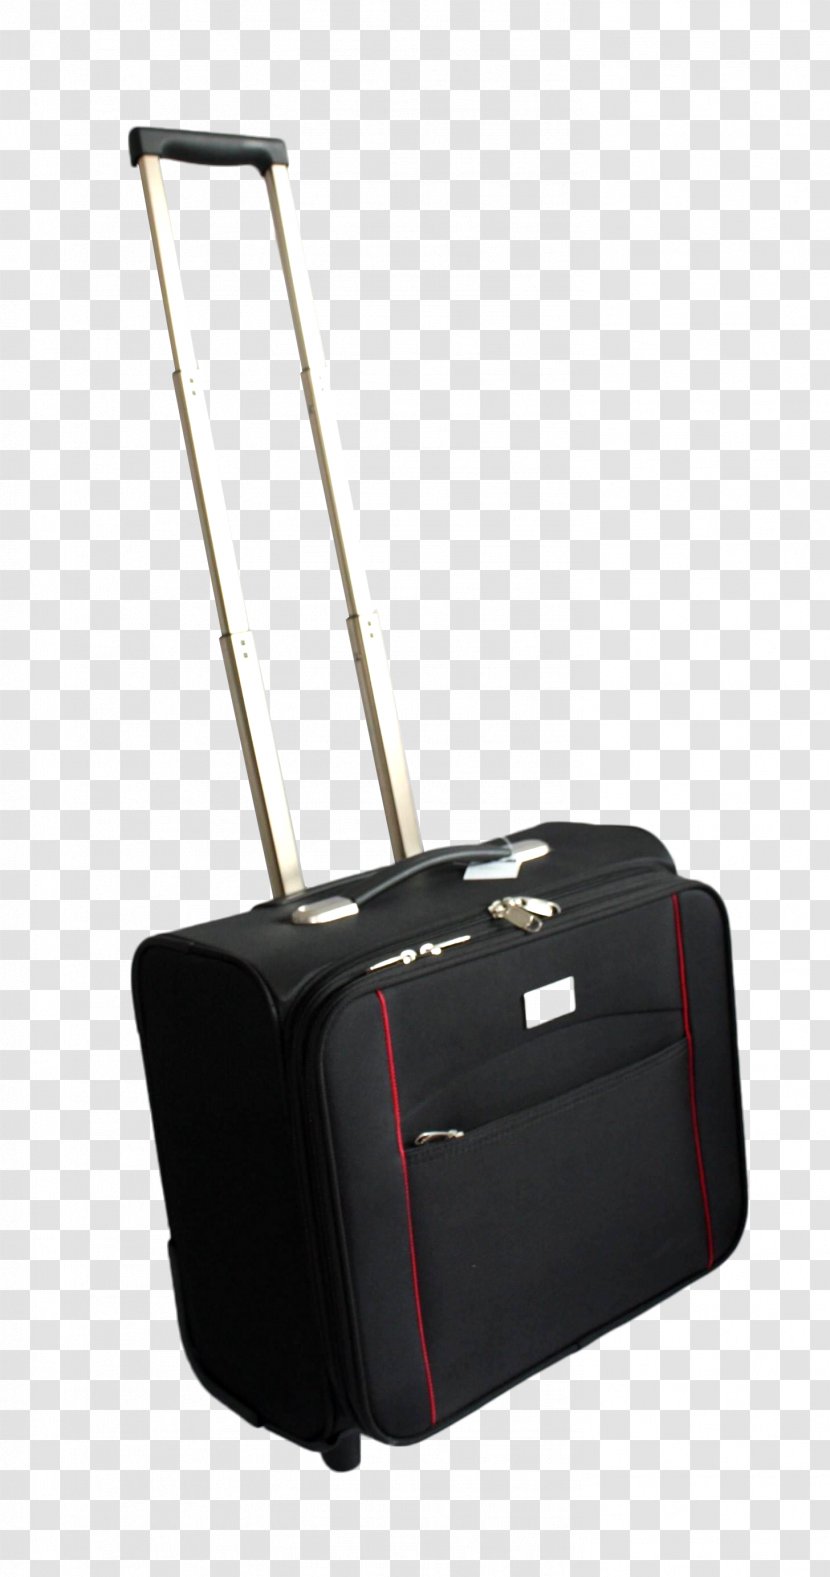 Hand Luggage Baggage Suitcase - Trunk - Drawbars Transparent PNG